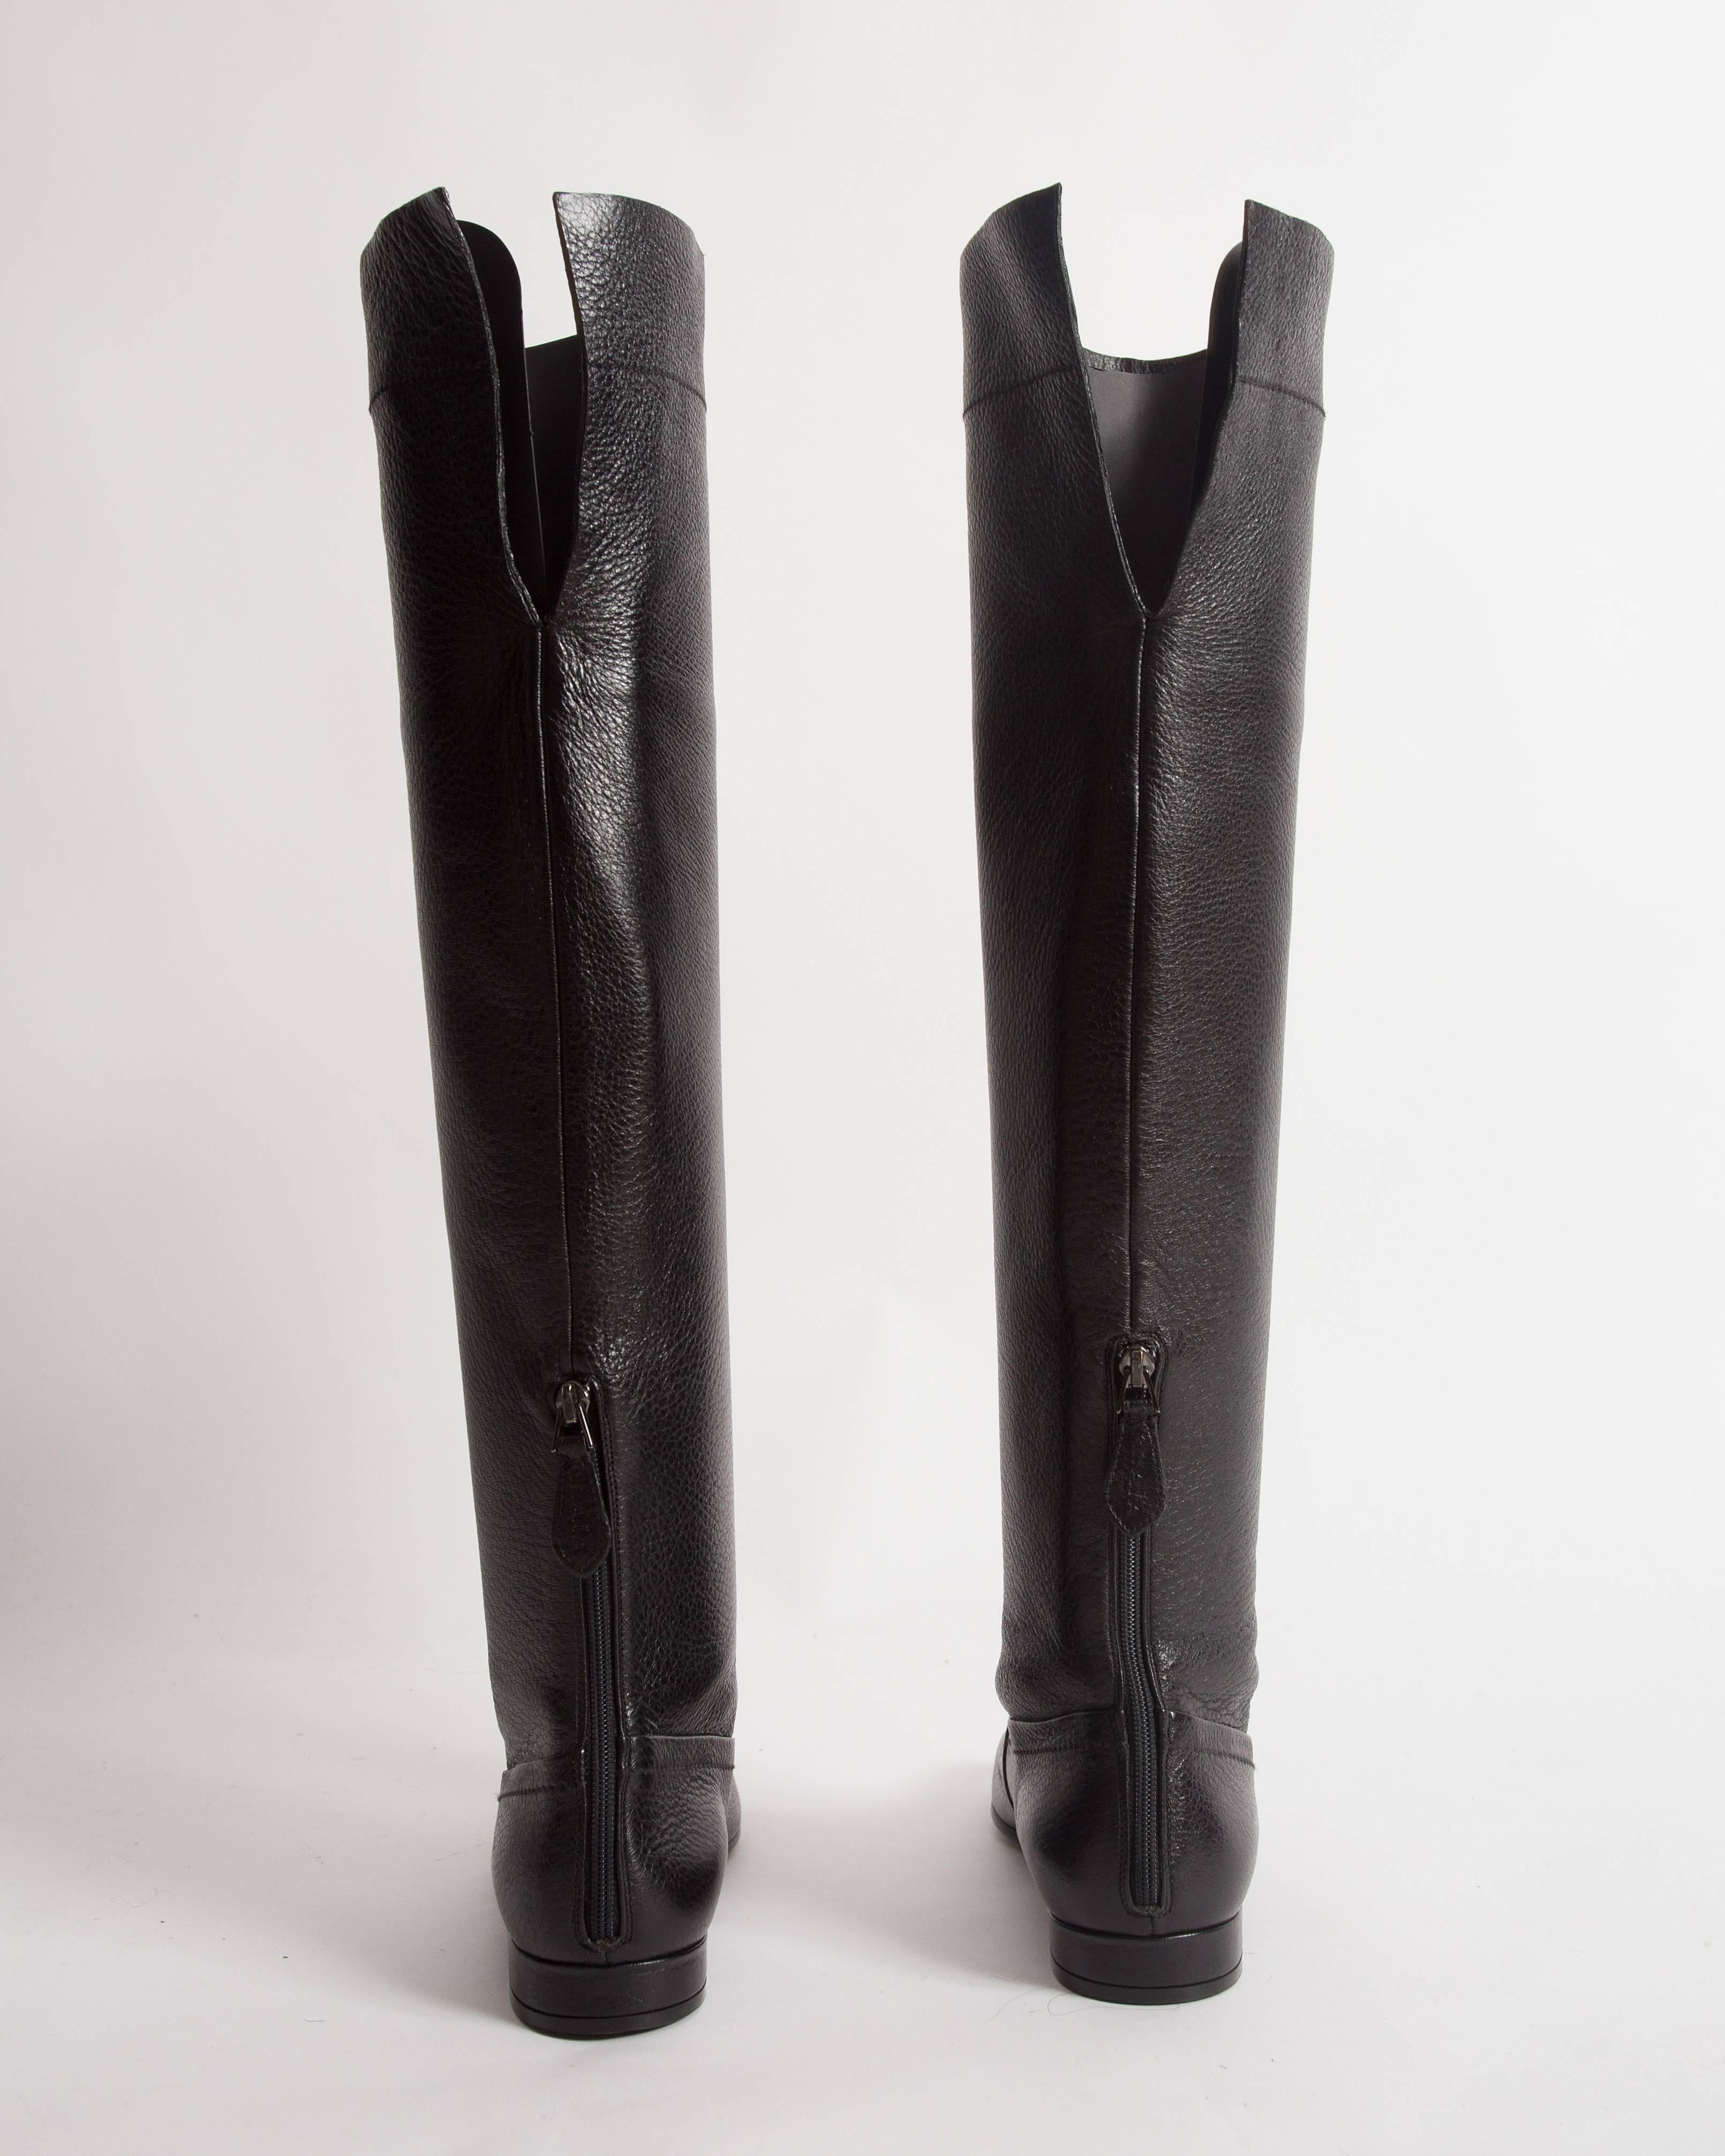 Alaia black leather riding boots, size 37.5 1